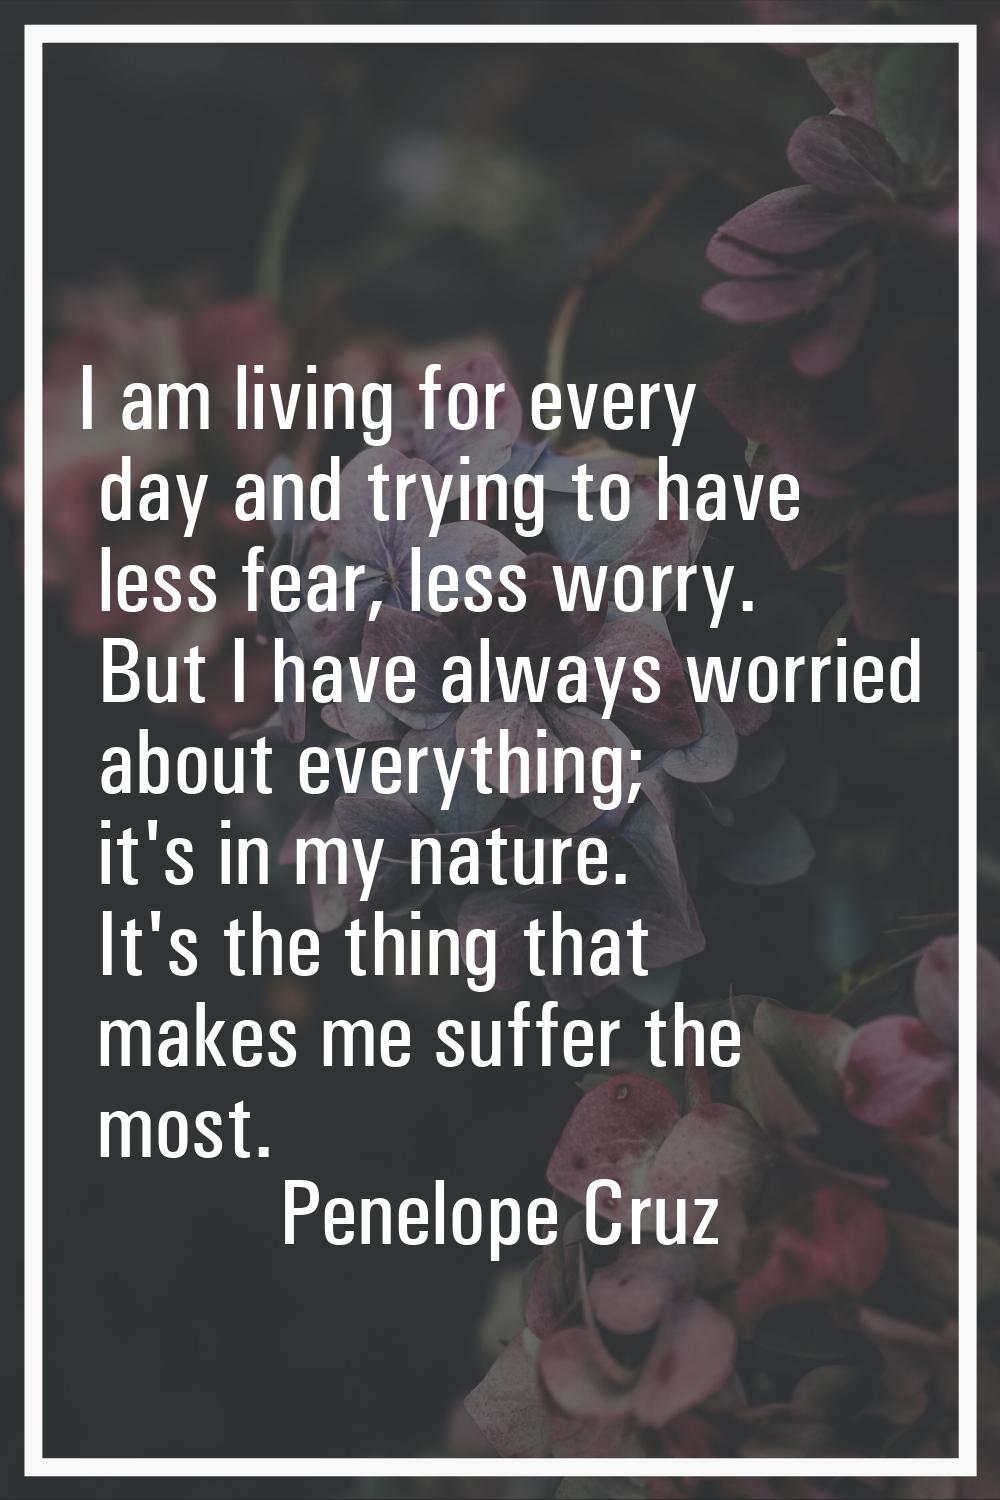 I am living for every day and trying to have less fear, less worry. But I have always worried about